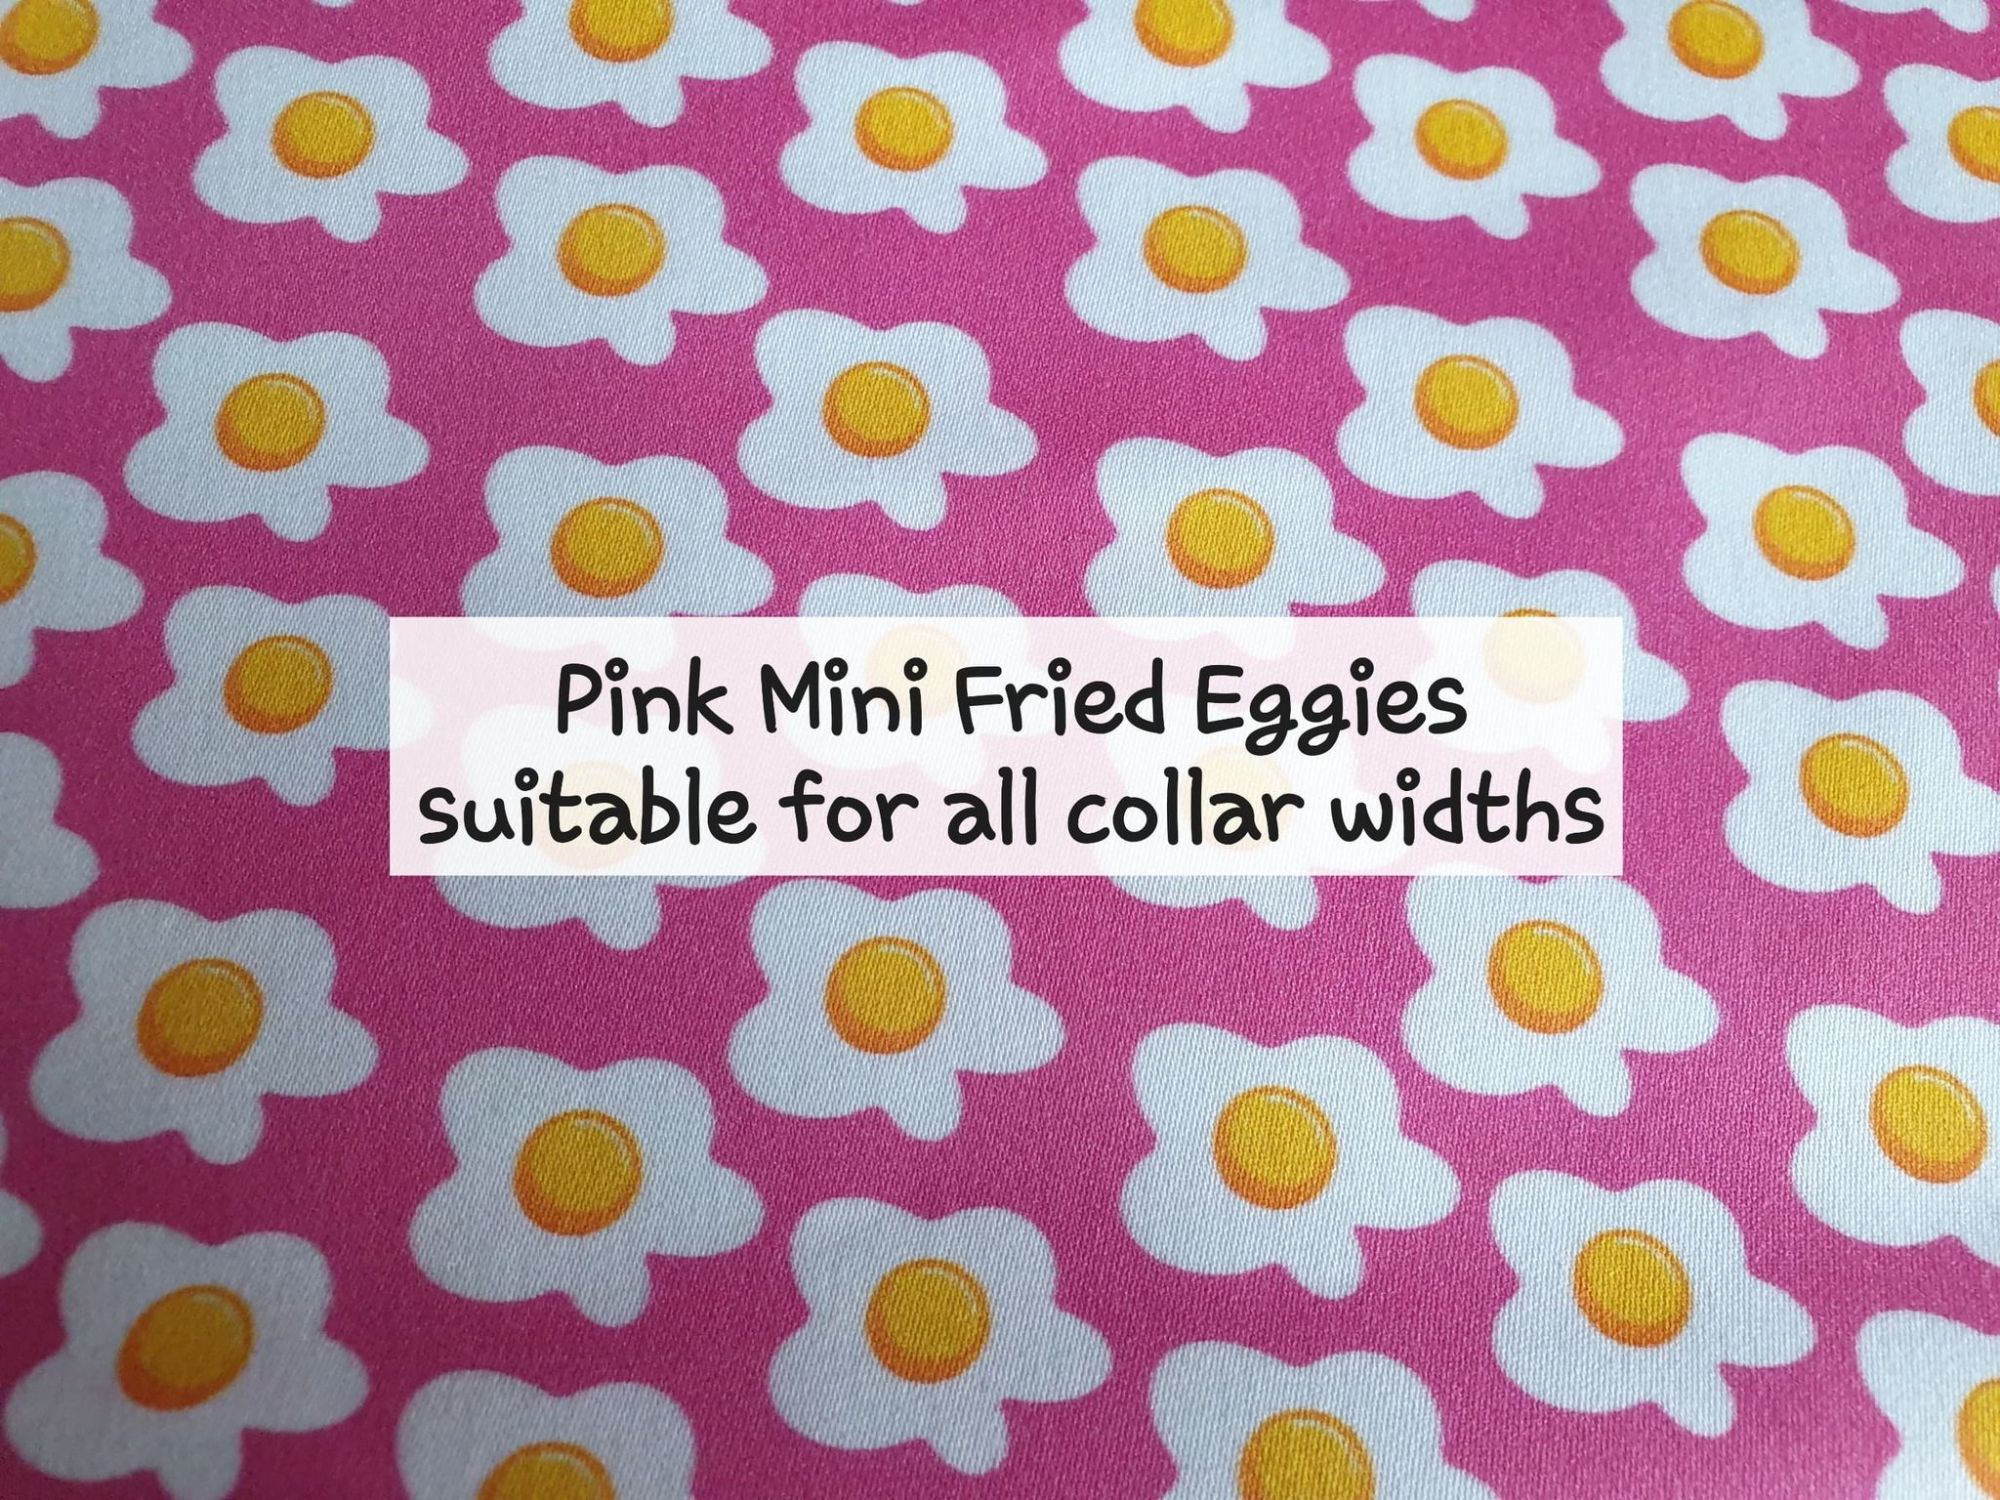 Pink Mini Fried Eggies - Suitable for all collar widths